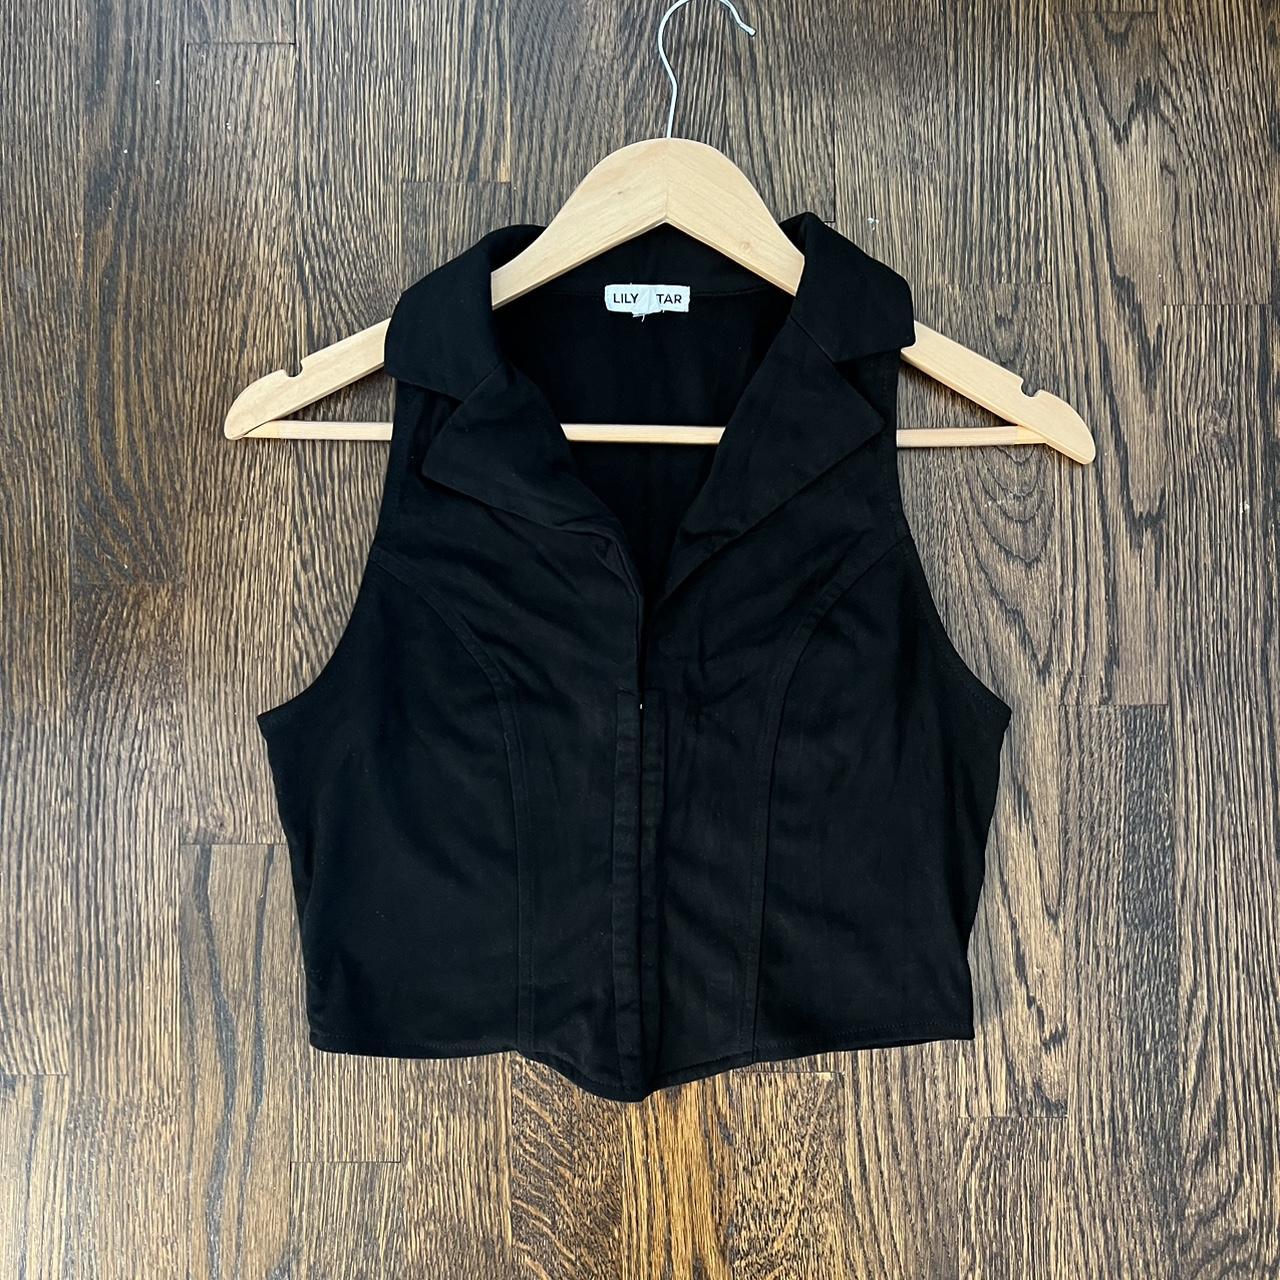 Lily Star juniors size M so fits like a normal size S - Depop